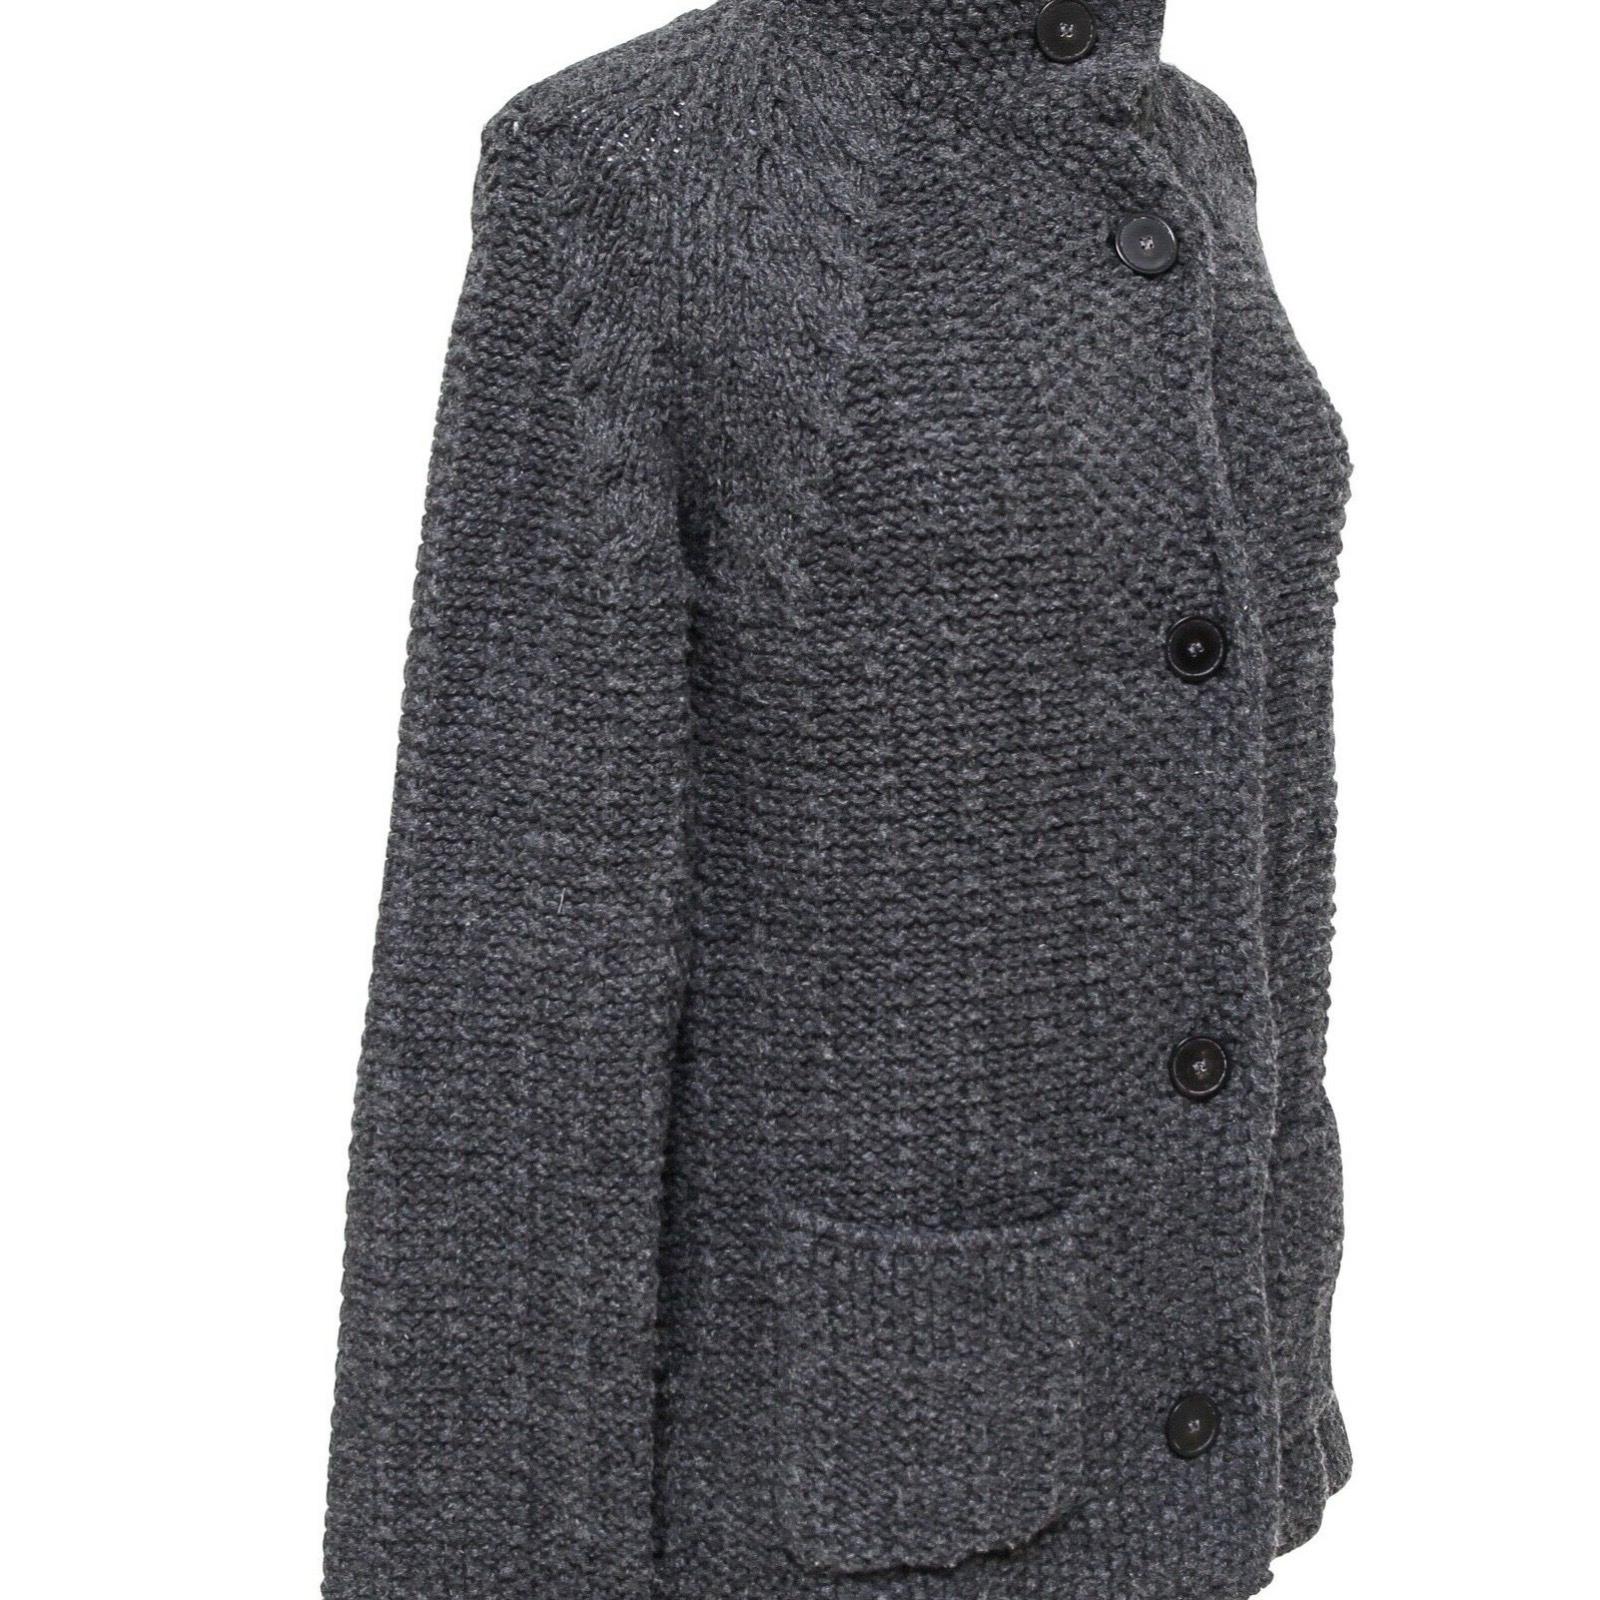 CHLOE Sweater Cardigan Knit Jacket CHARCOAL GREY Long Sleeve Sz XS 2011 In Excellent Condition For Sale In Hollywood, FL